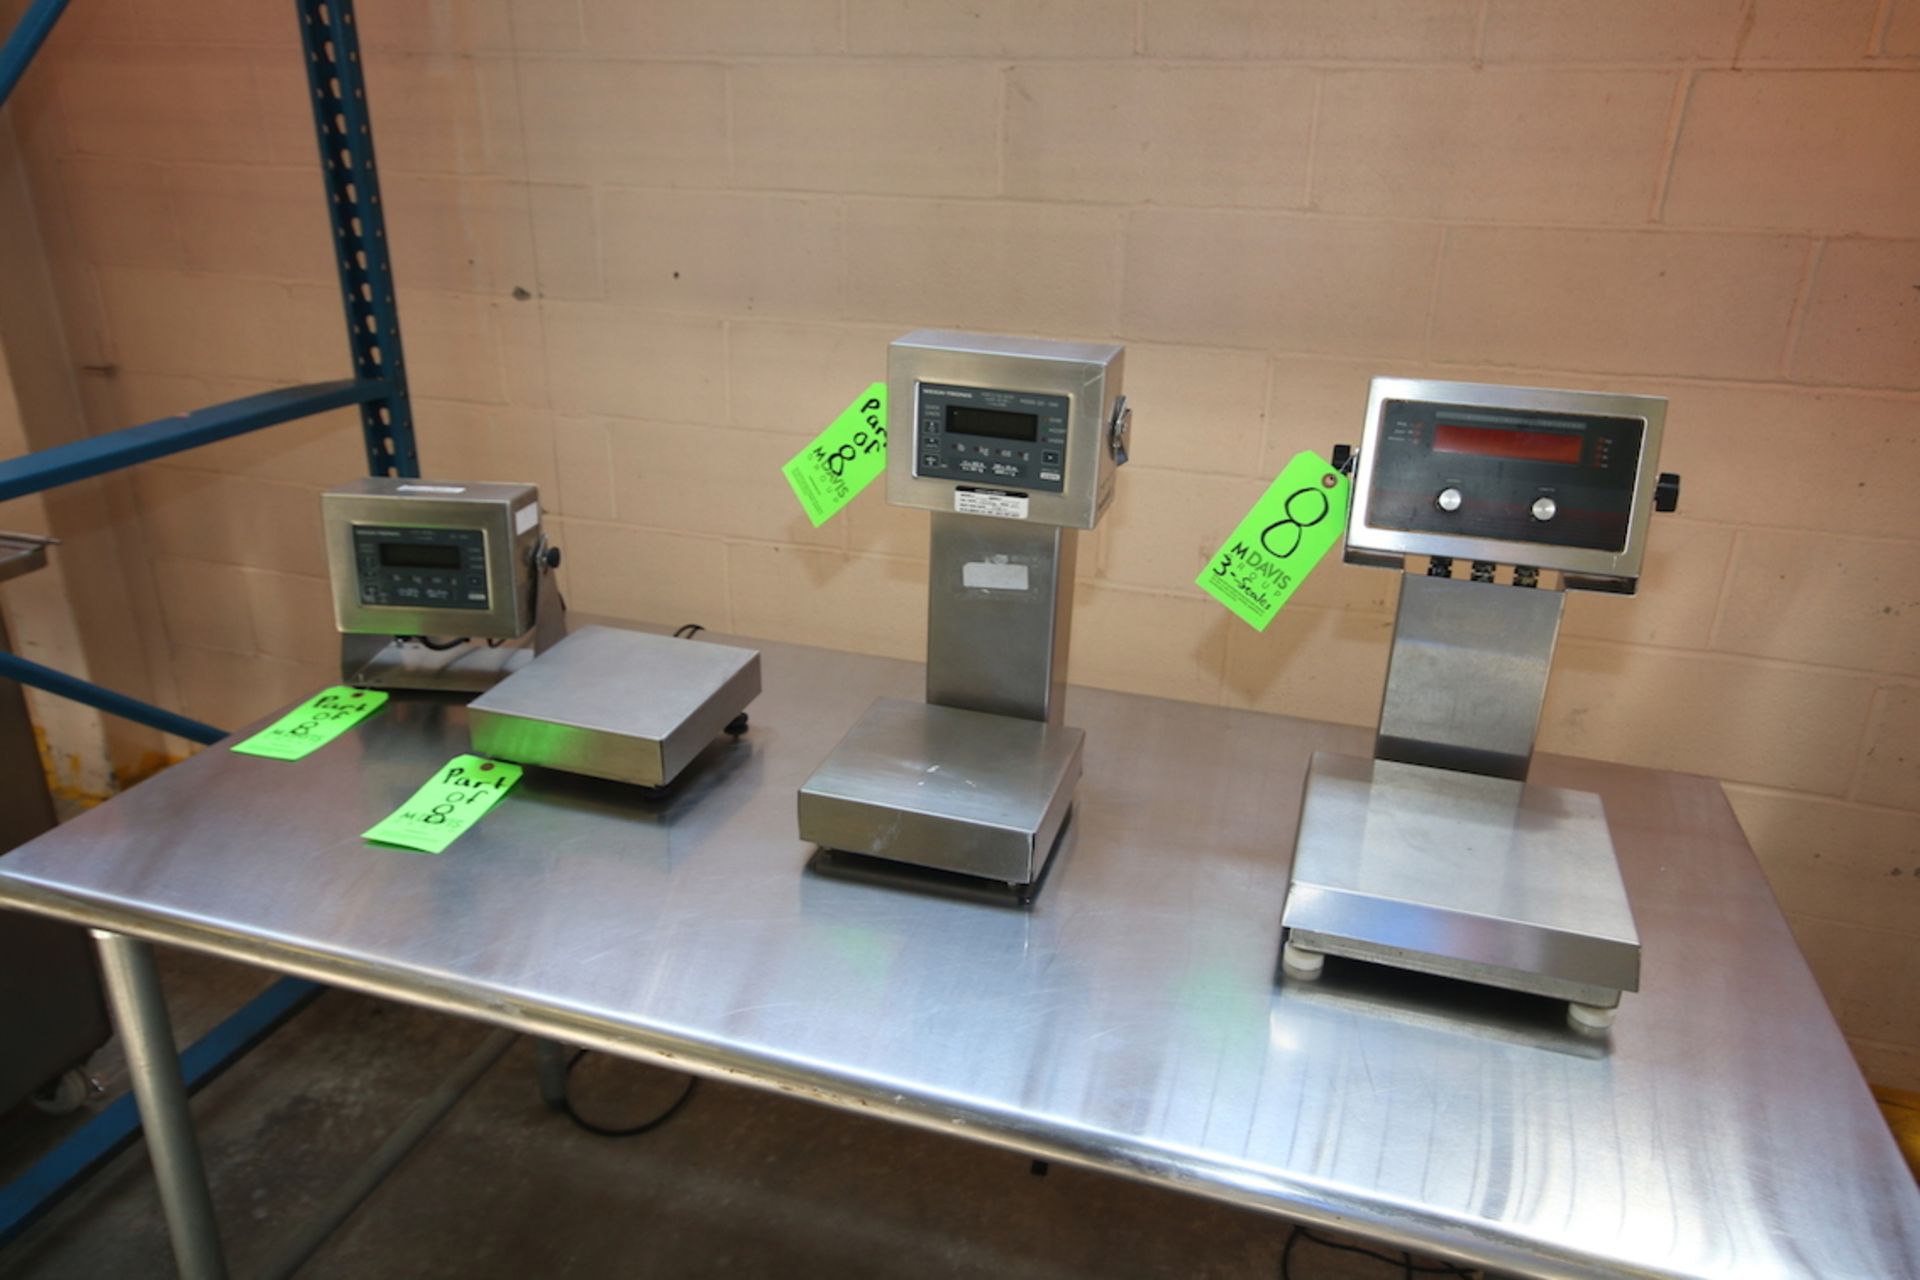 S/S Digital Platform Scales, Includes (2) Weigh-Tronix Scales, M/N QC-3265, with 8 1/2" L x 8 1/2" W